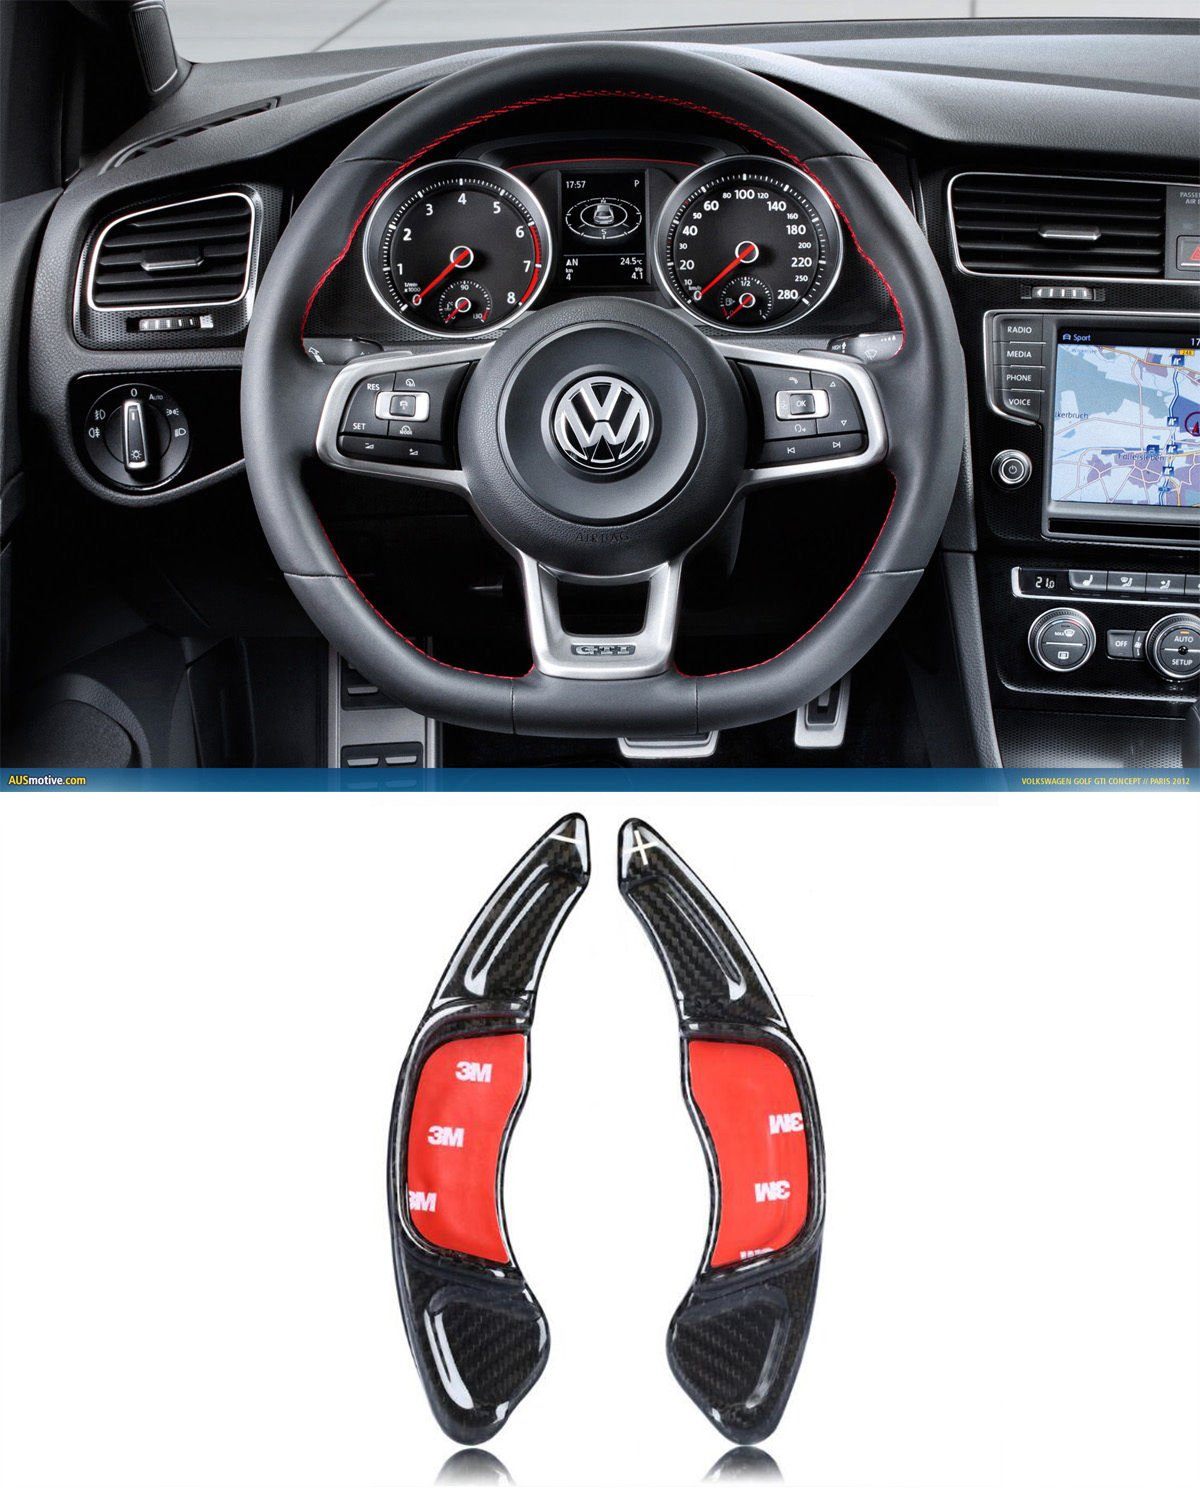 Pinalloy Carbon Fiber DSG Paddle Shifters Extension for VW MK7 GTI